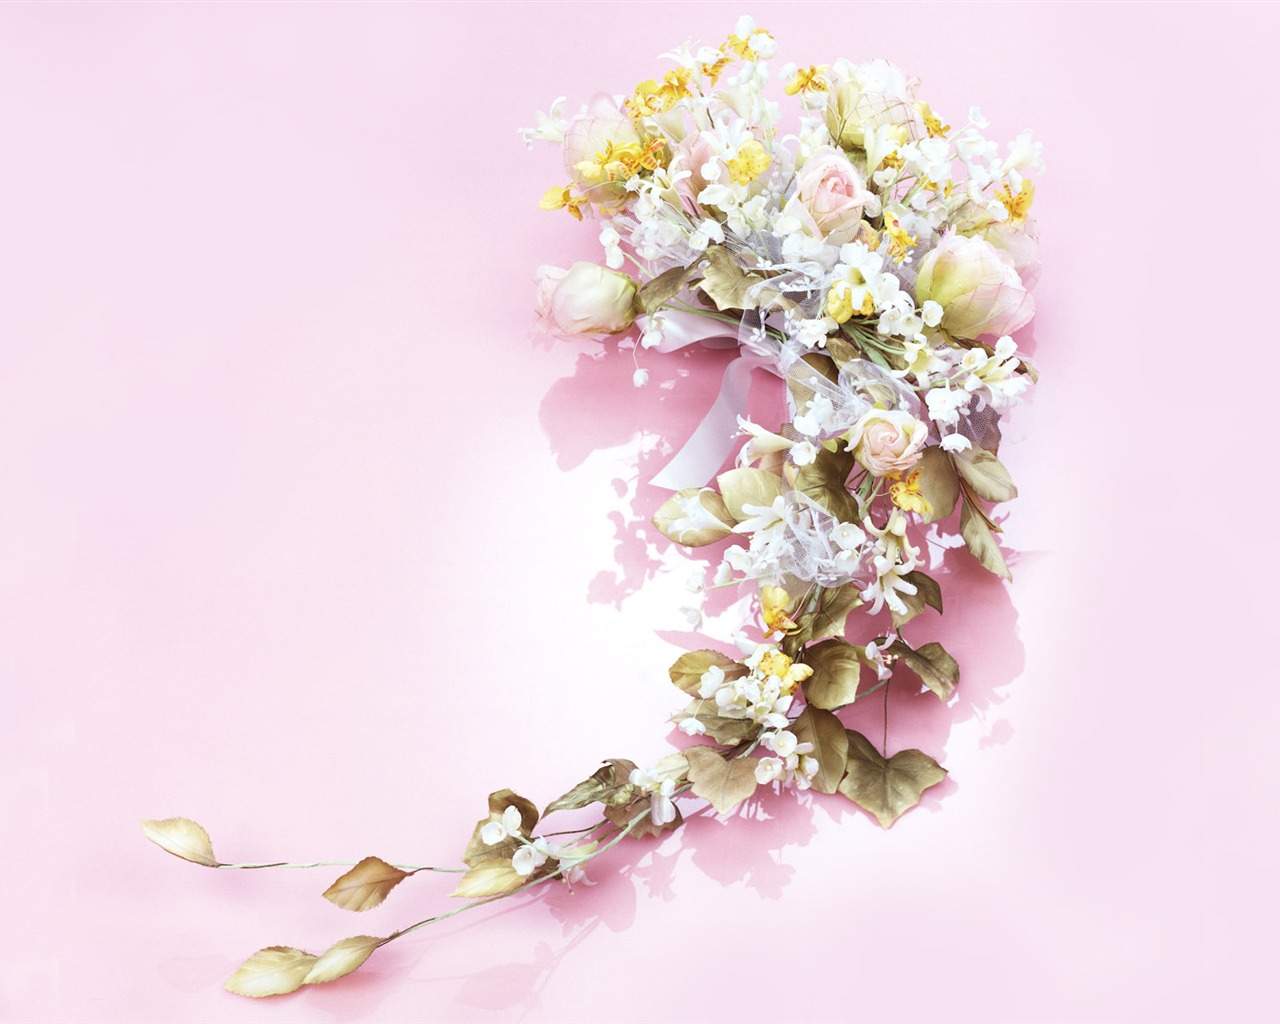 Wedding Flowers items wallpapers (2) #6 - 1280x1024